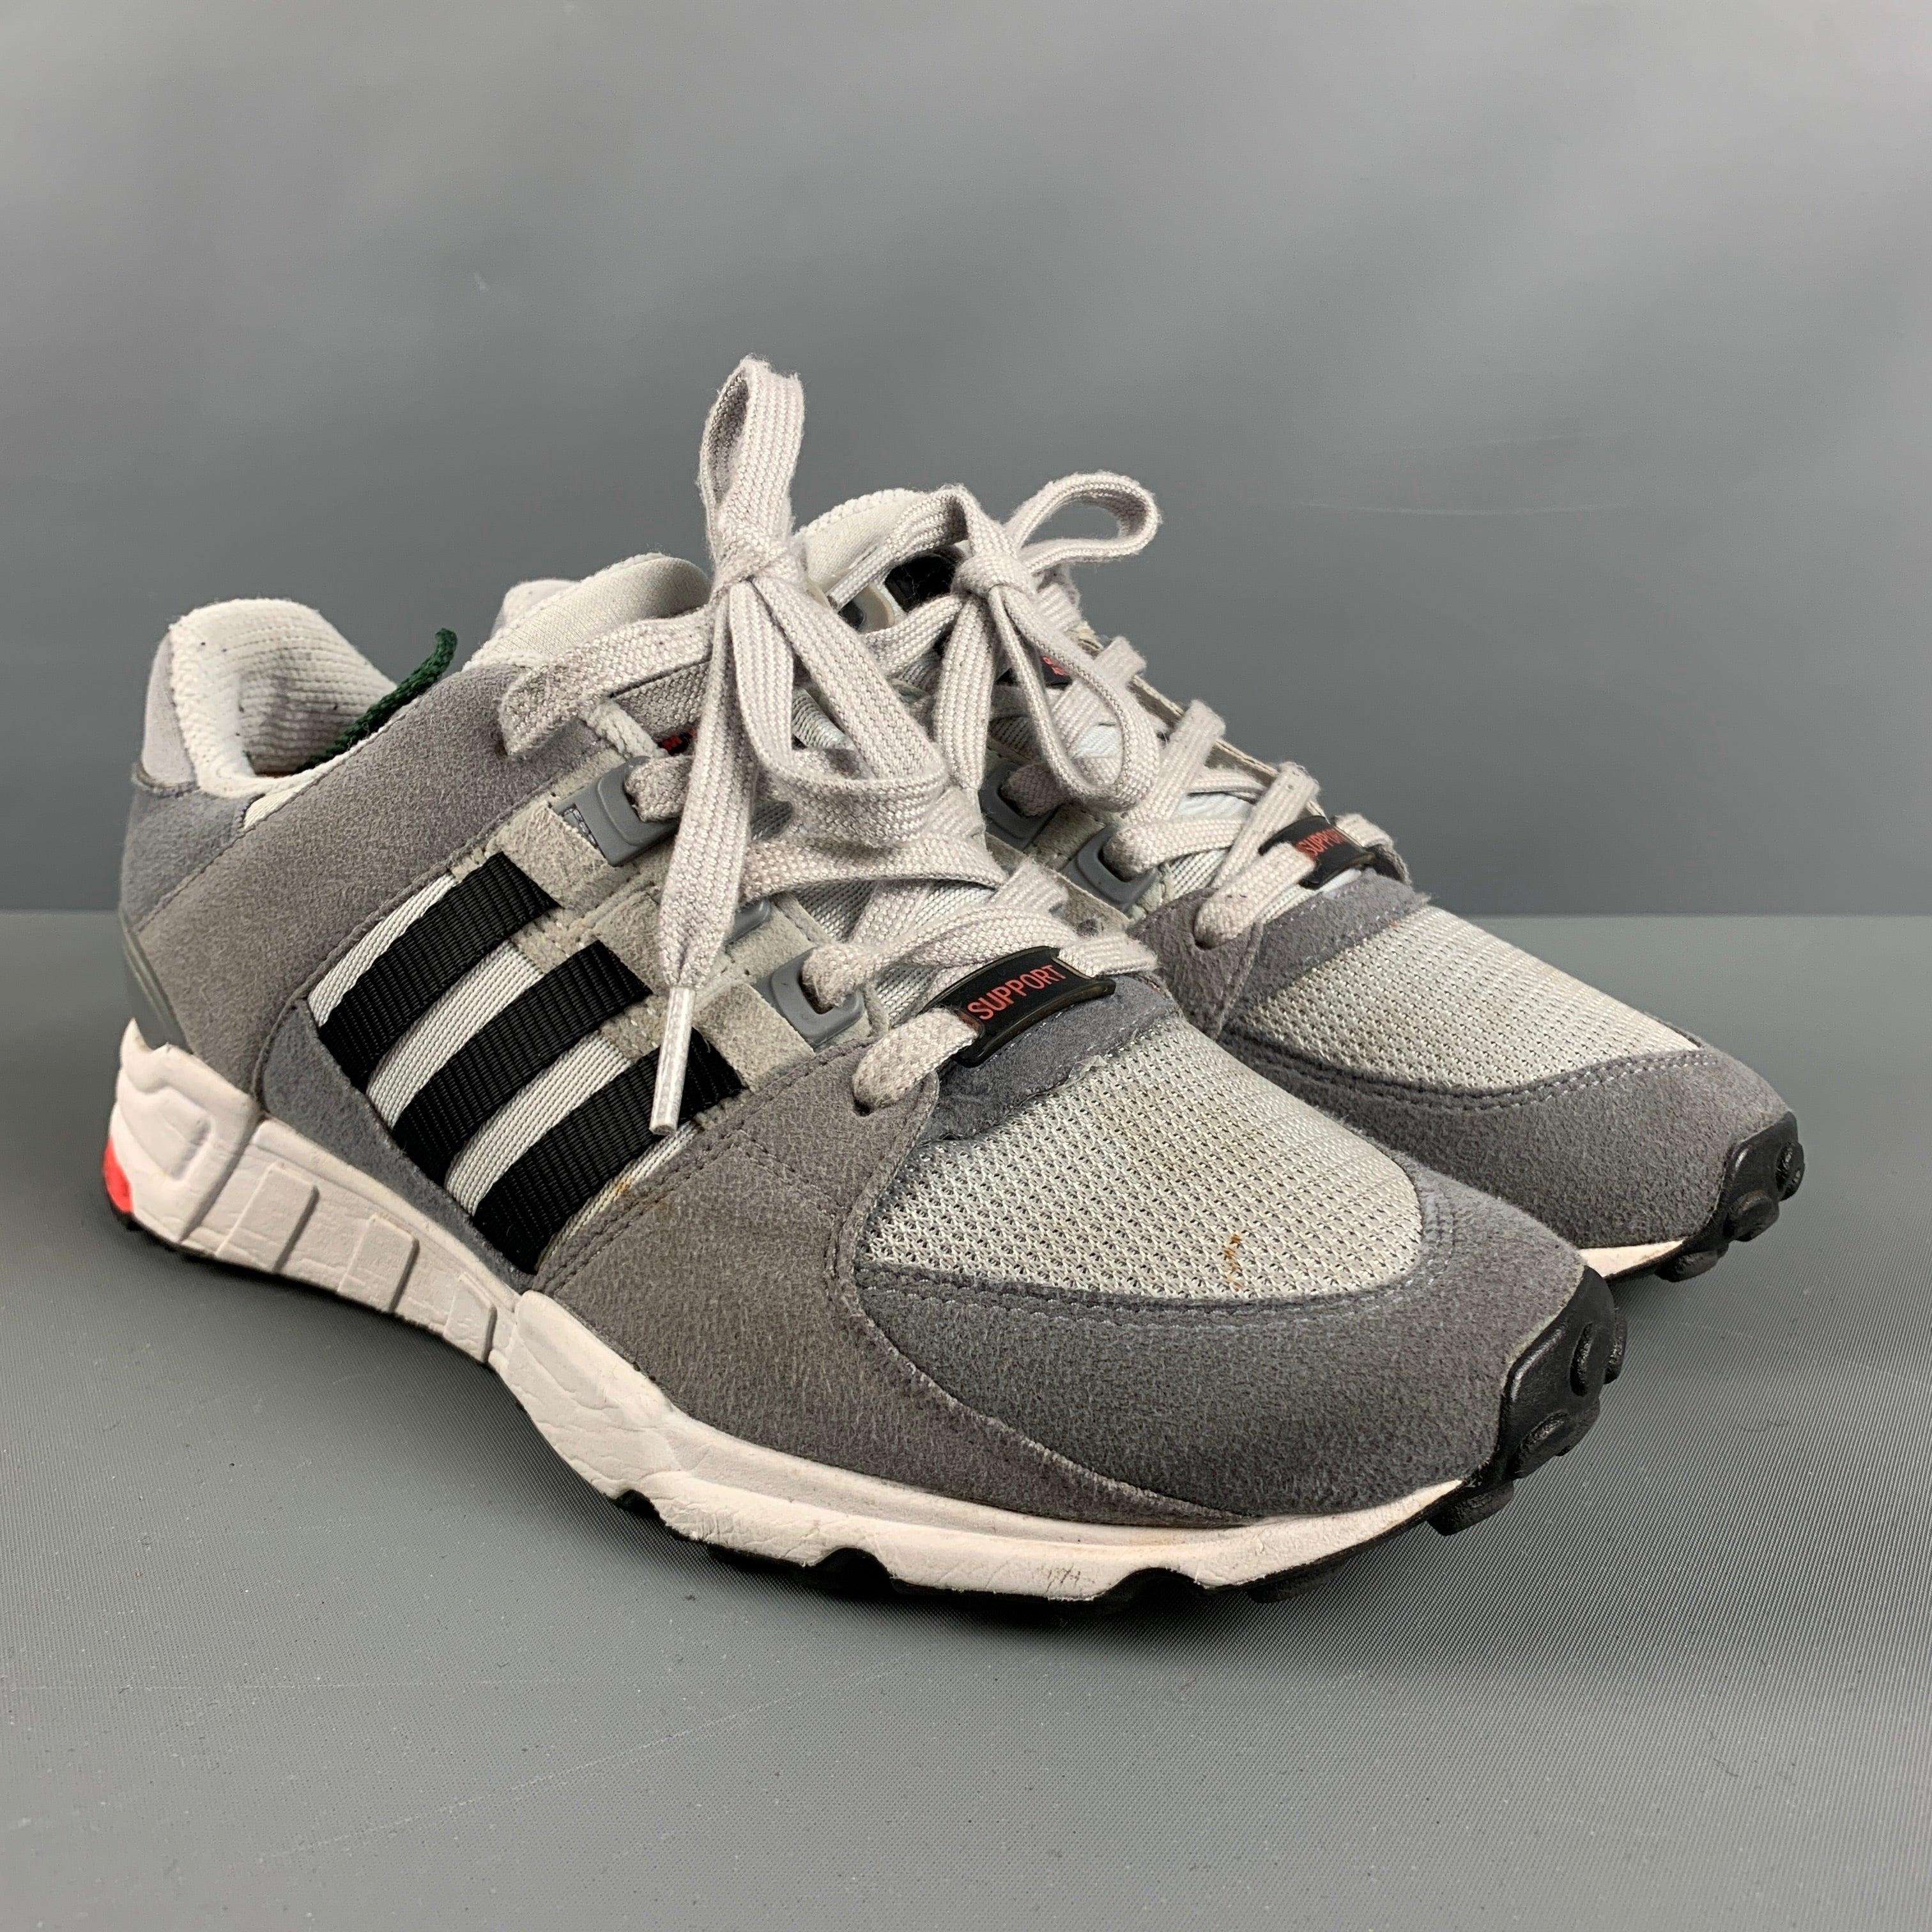 ADIDAS x EQUIPMENT sneakers comes in a grey and white mixed material featuring a low-top style, chucky rubber sole, and a lace up closure.Good Pre-Owned Condition. Moderate signs of wear. 

Marked:   8.5Outsole: 11 inches  x 3.5 inches  
 
  
  
